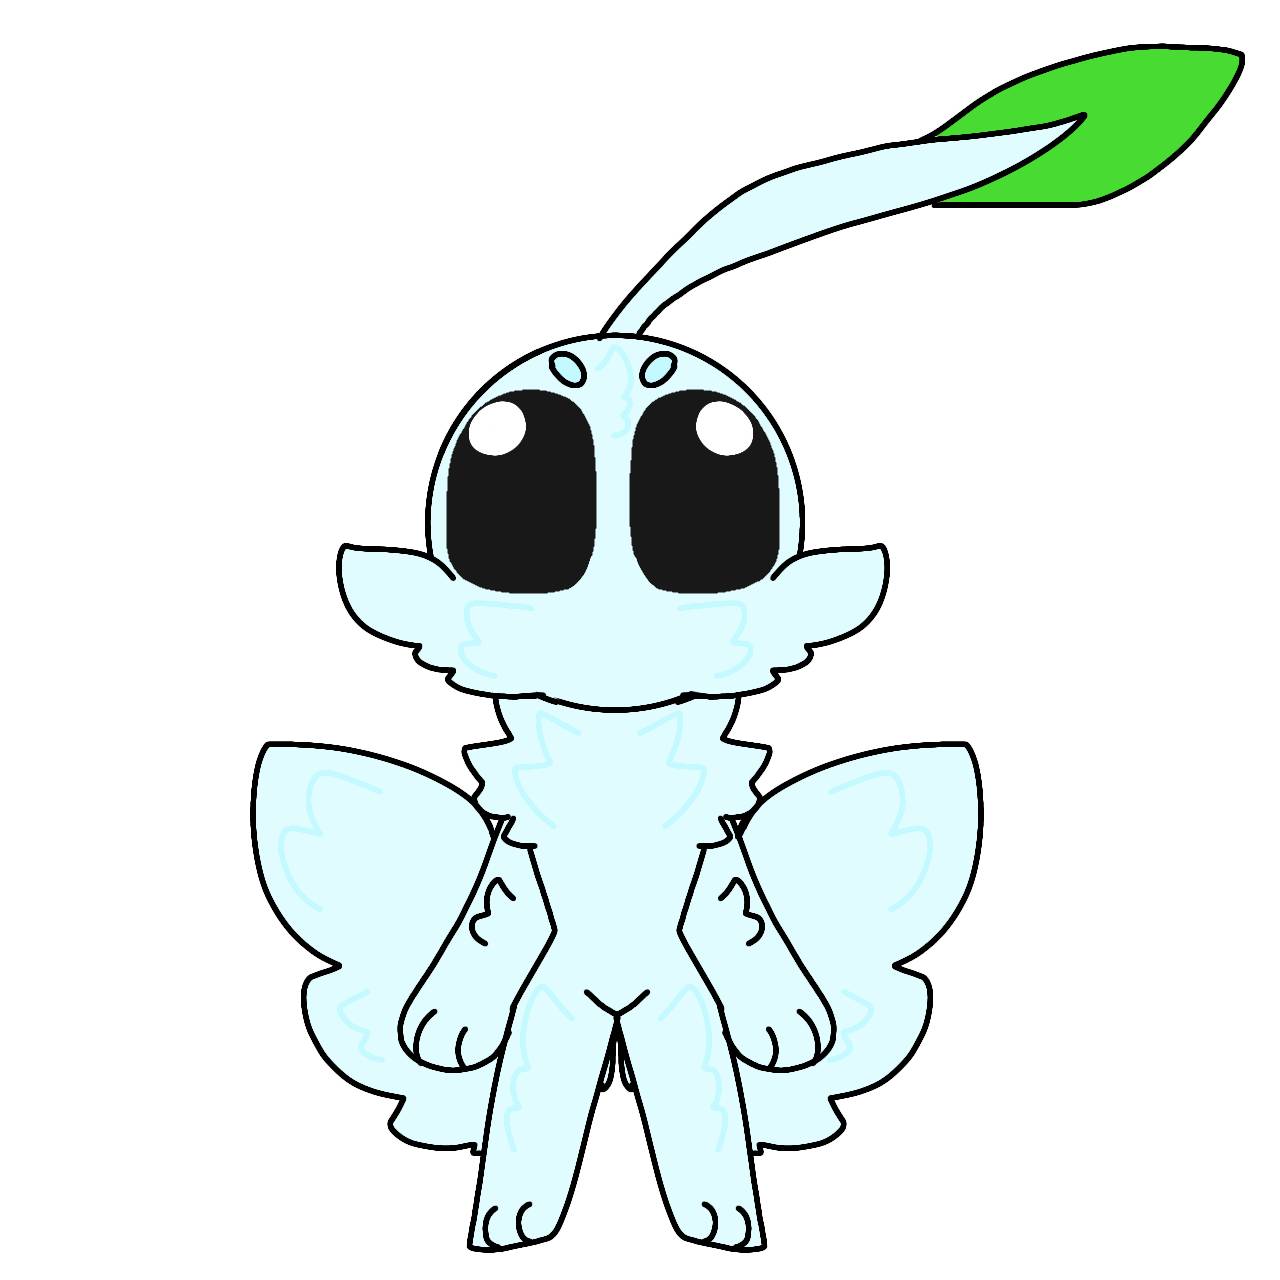 Fluffy Pikmin by Mochitheslimepup13 on DeviantArt